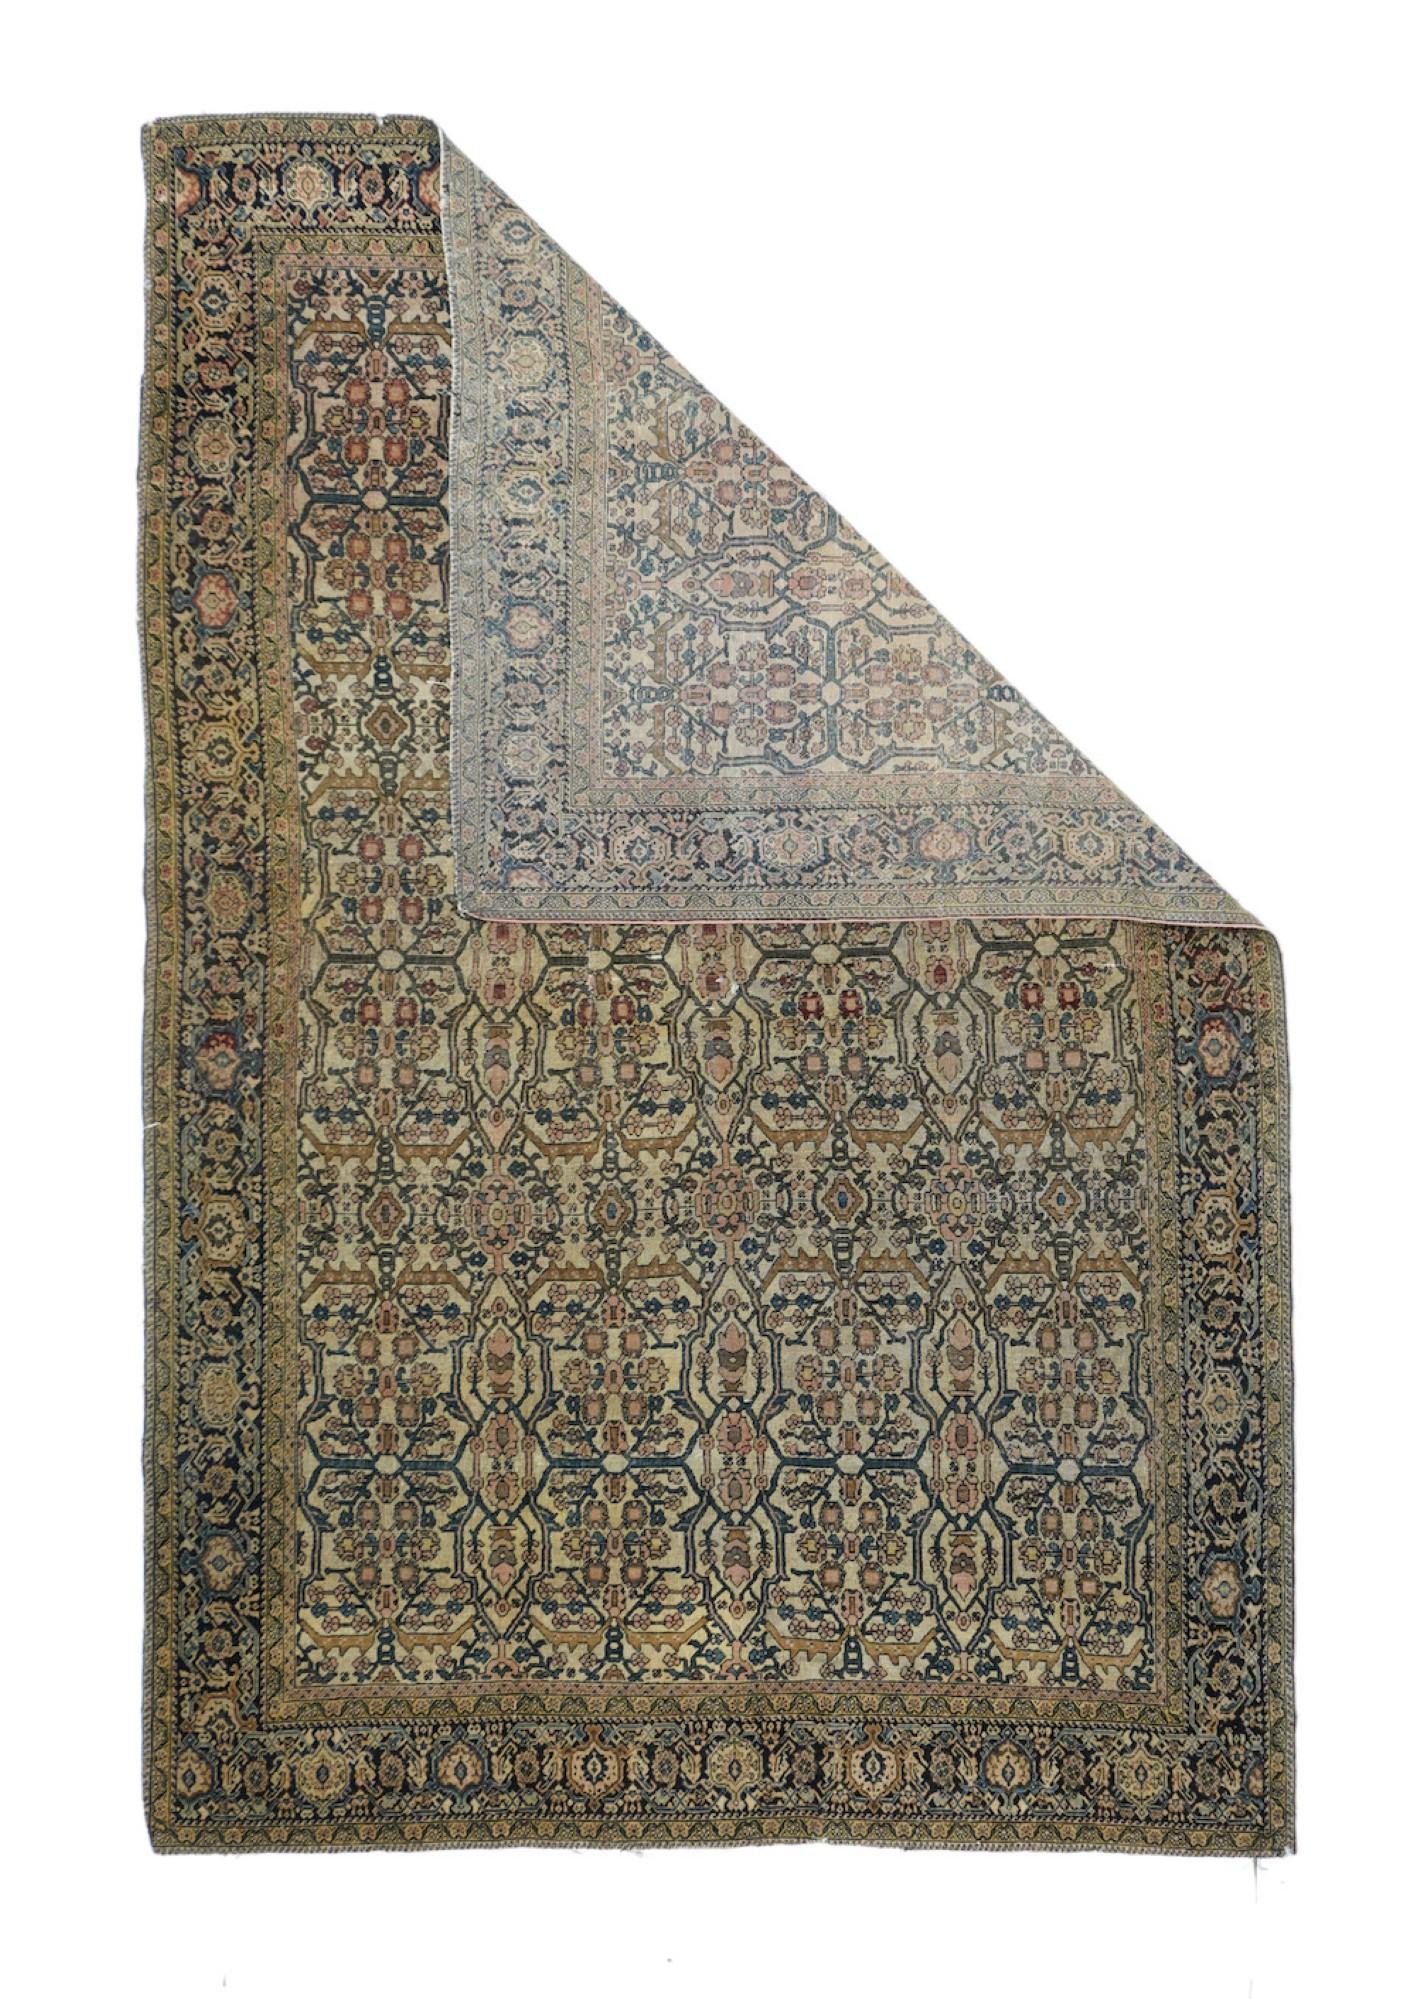 This well-woven rustic west Persian scatter shows a semi-urban allover textile pattern of open lozenges, strongly serrated leaves, radiating flower groups and arabesques defining reserves. Green, navy, brown-black and red are among the detail tones.